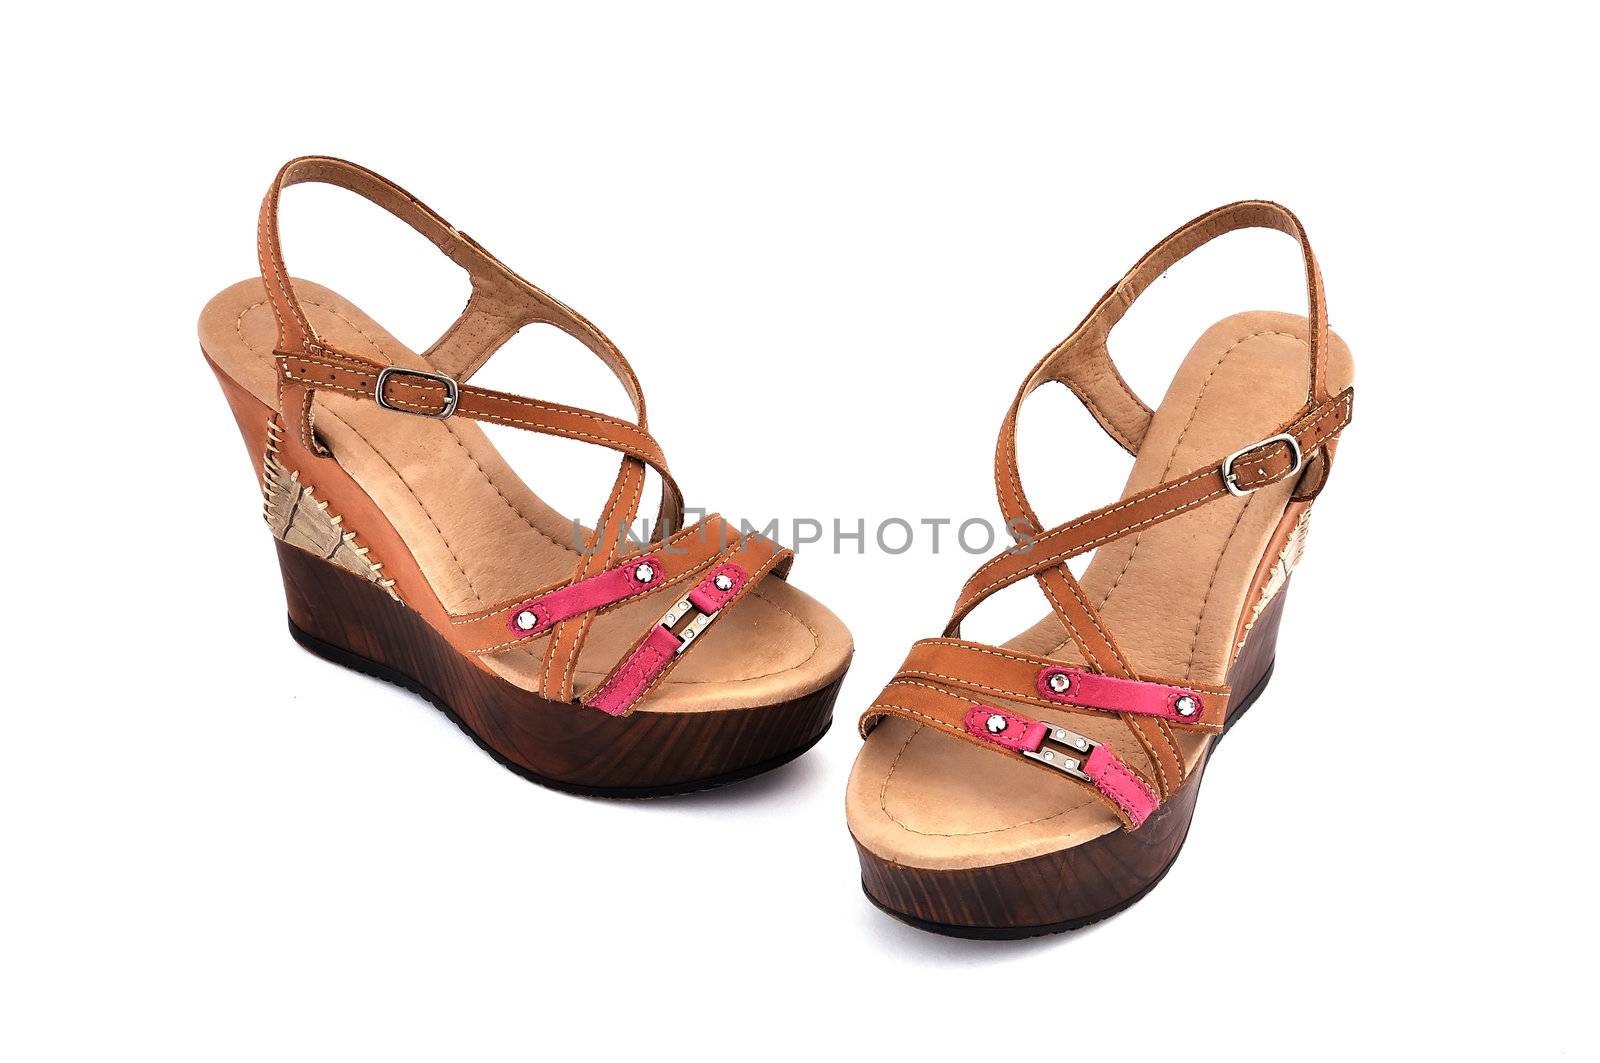 brown ladies shoes on a white background